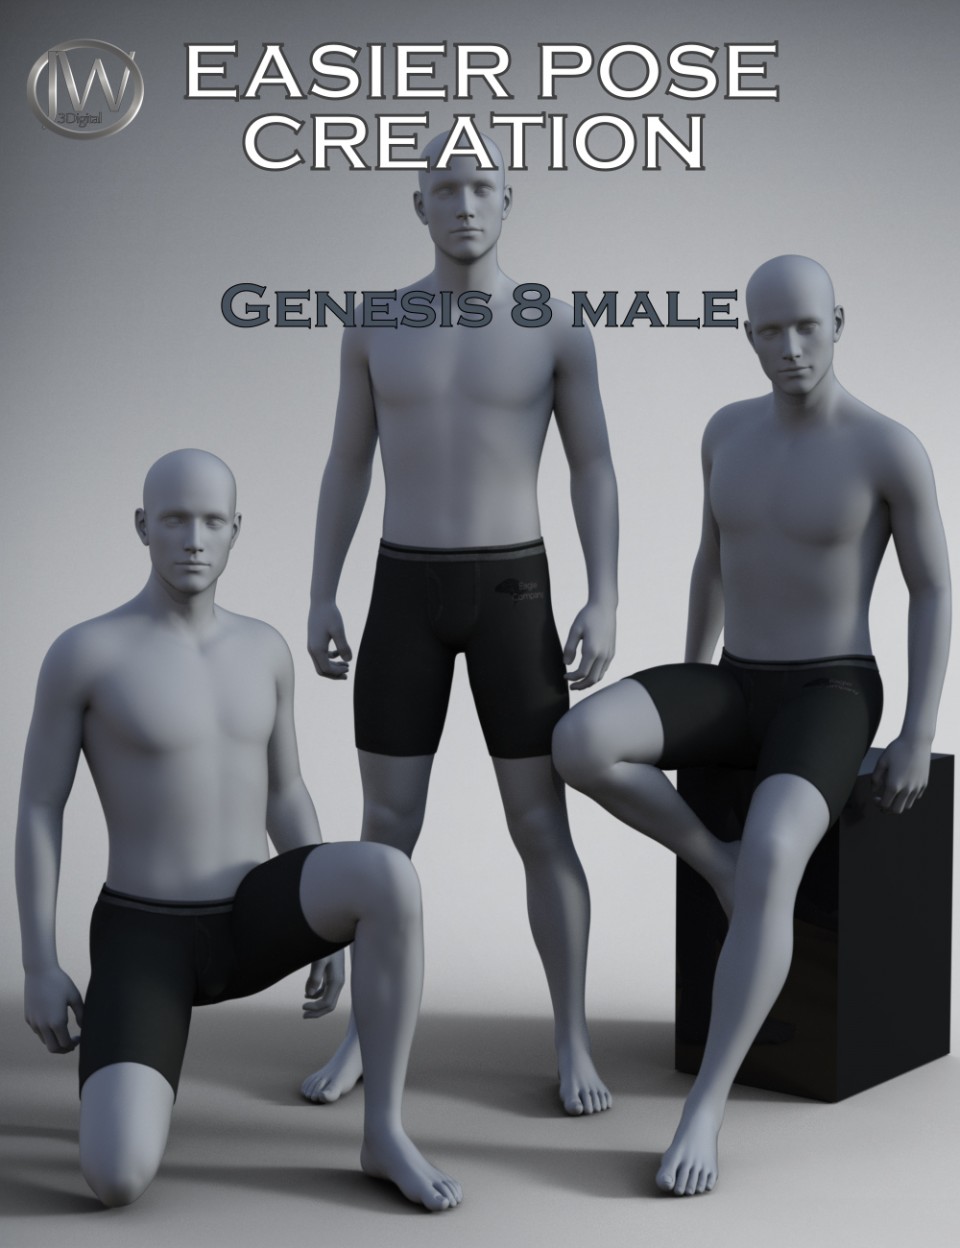 Easier Pose Creation for Genesis 8 Male